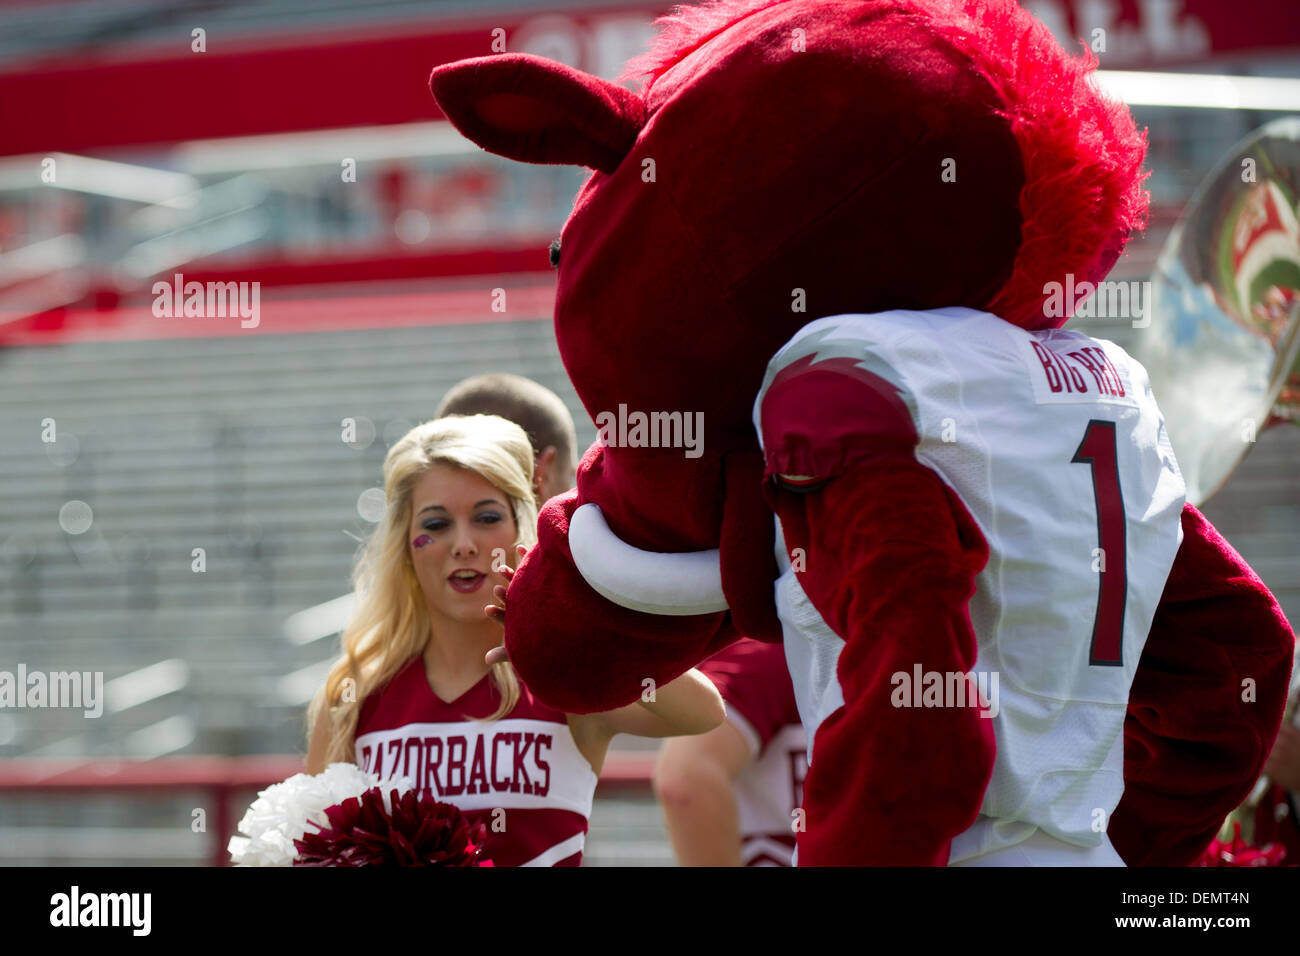 Sept. 21, 2013 - Piscataway, New Jersey, U.S - September 21, 2013: A Arkansas Razorbacks cheerleader pets the nose of the mascot prior to the game between Arkansas Razorbacks and Rutgers Scarlet Knights at Highpoint Solutions Stadium in Piscataway, NJ. Stock Photo